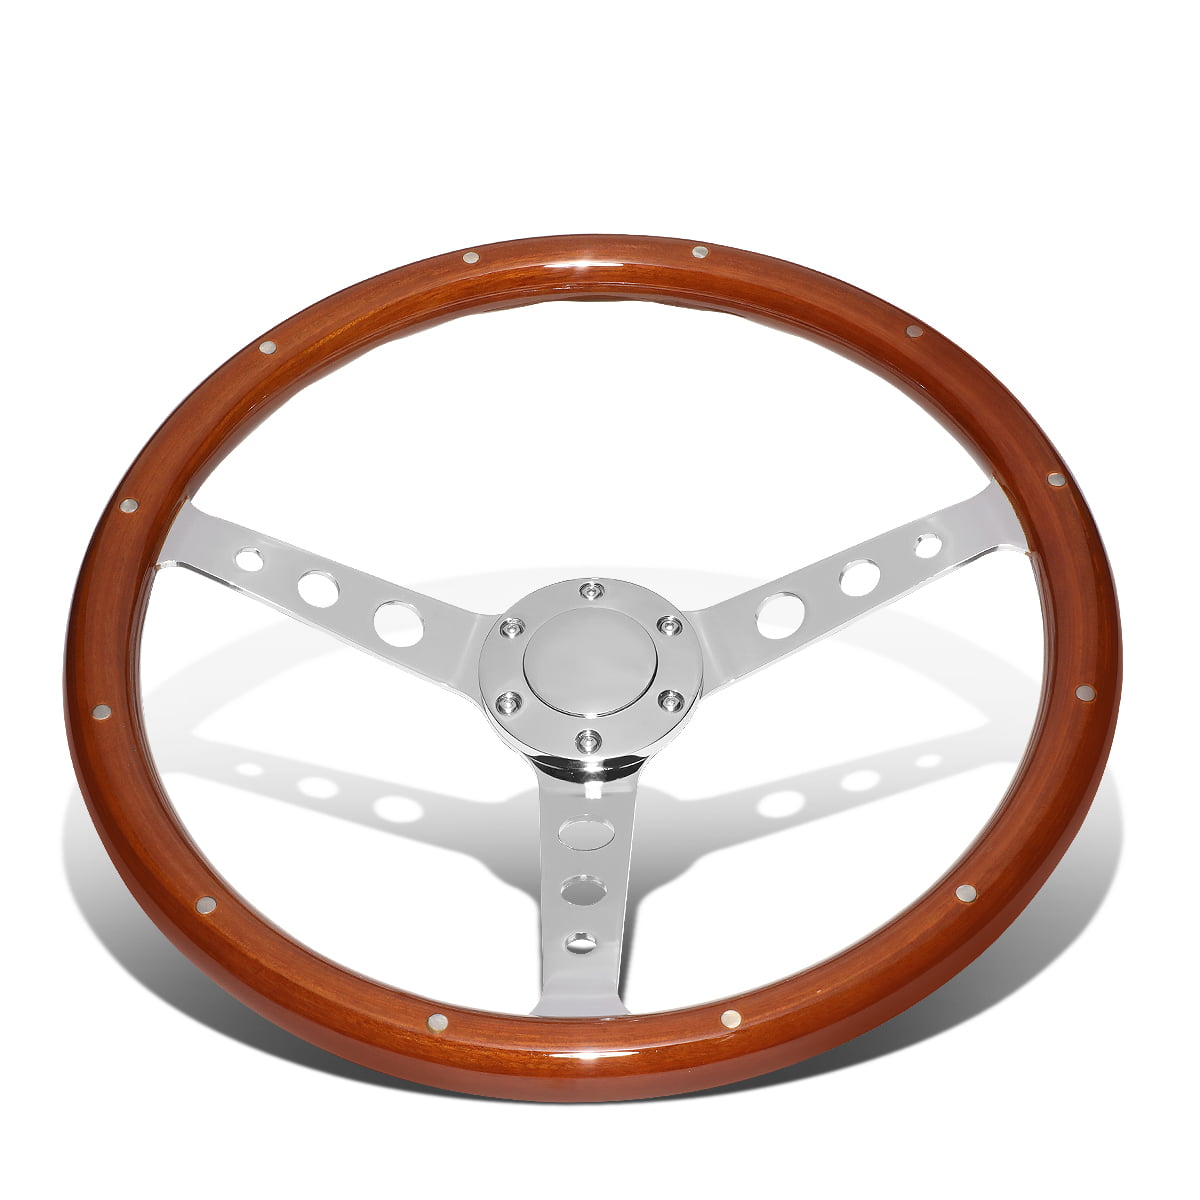 15 Inches Black Wood Grain Grip Vintage Steering Wheel 2 Inches Deep Dish Stainless Steel Spokes w/Horn Button 